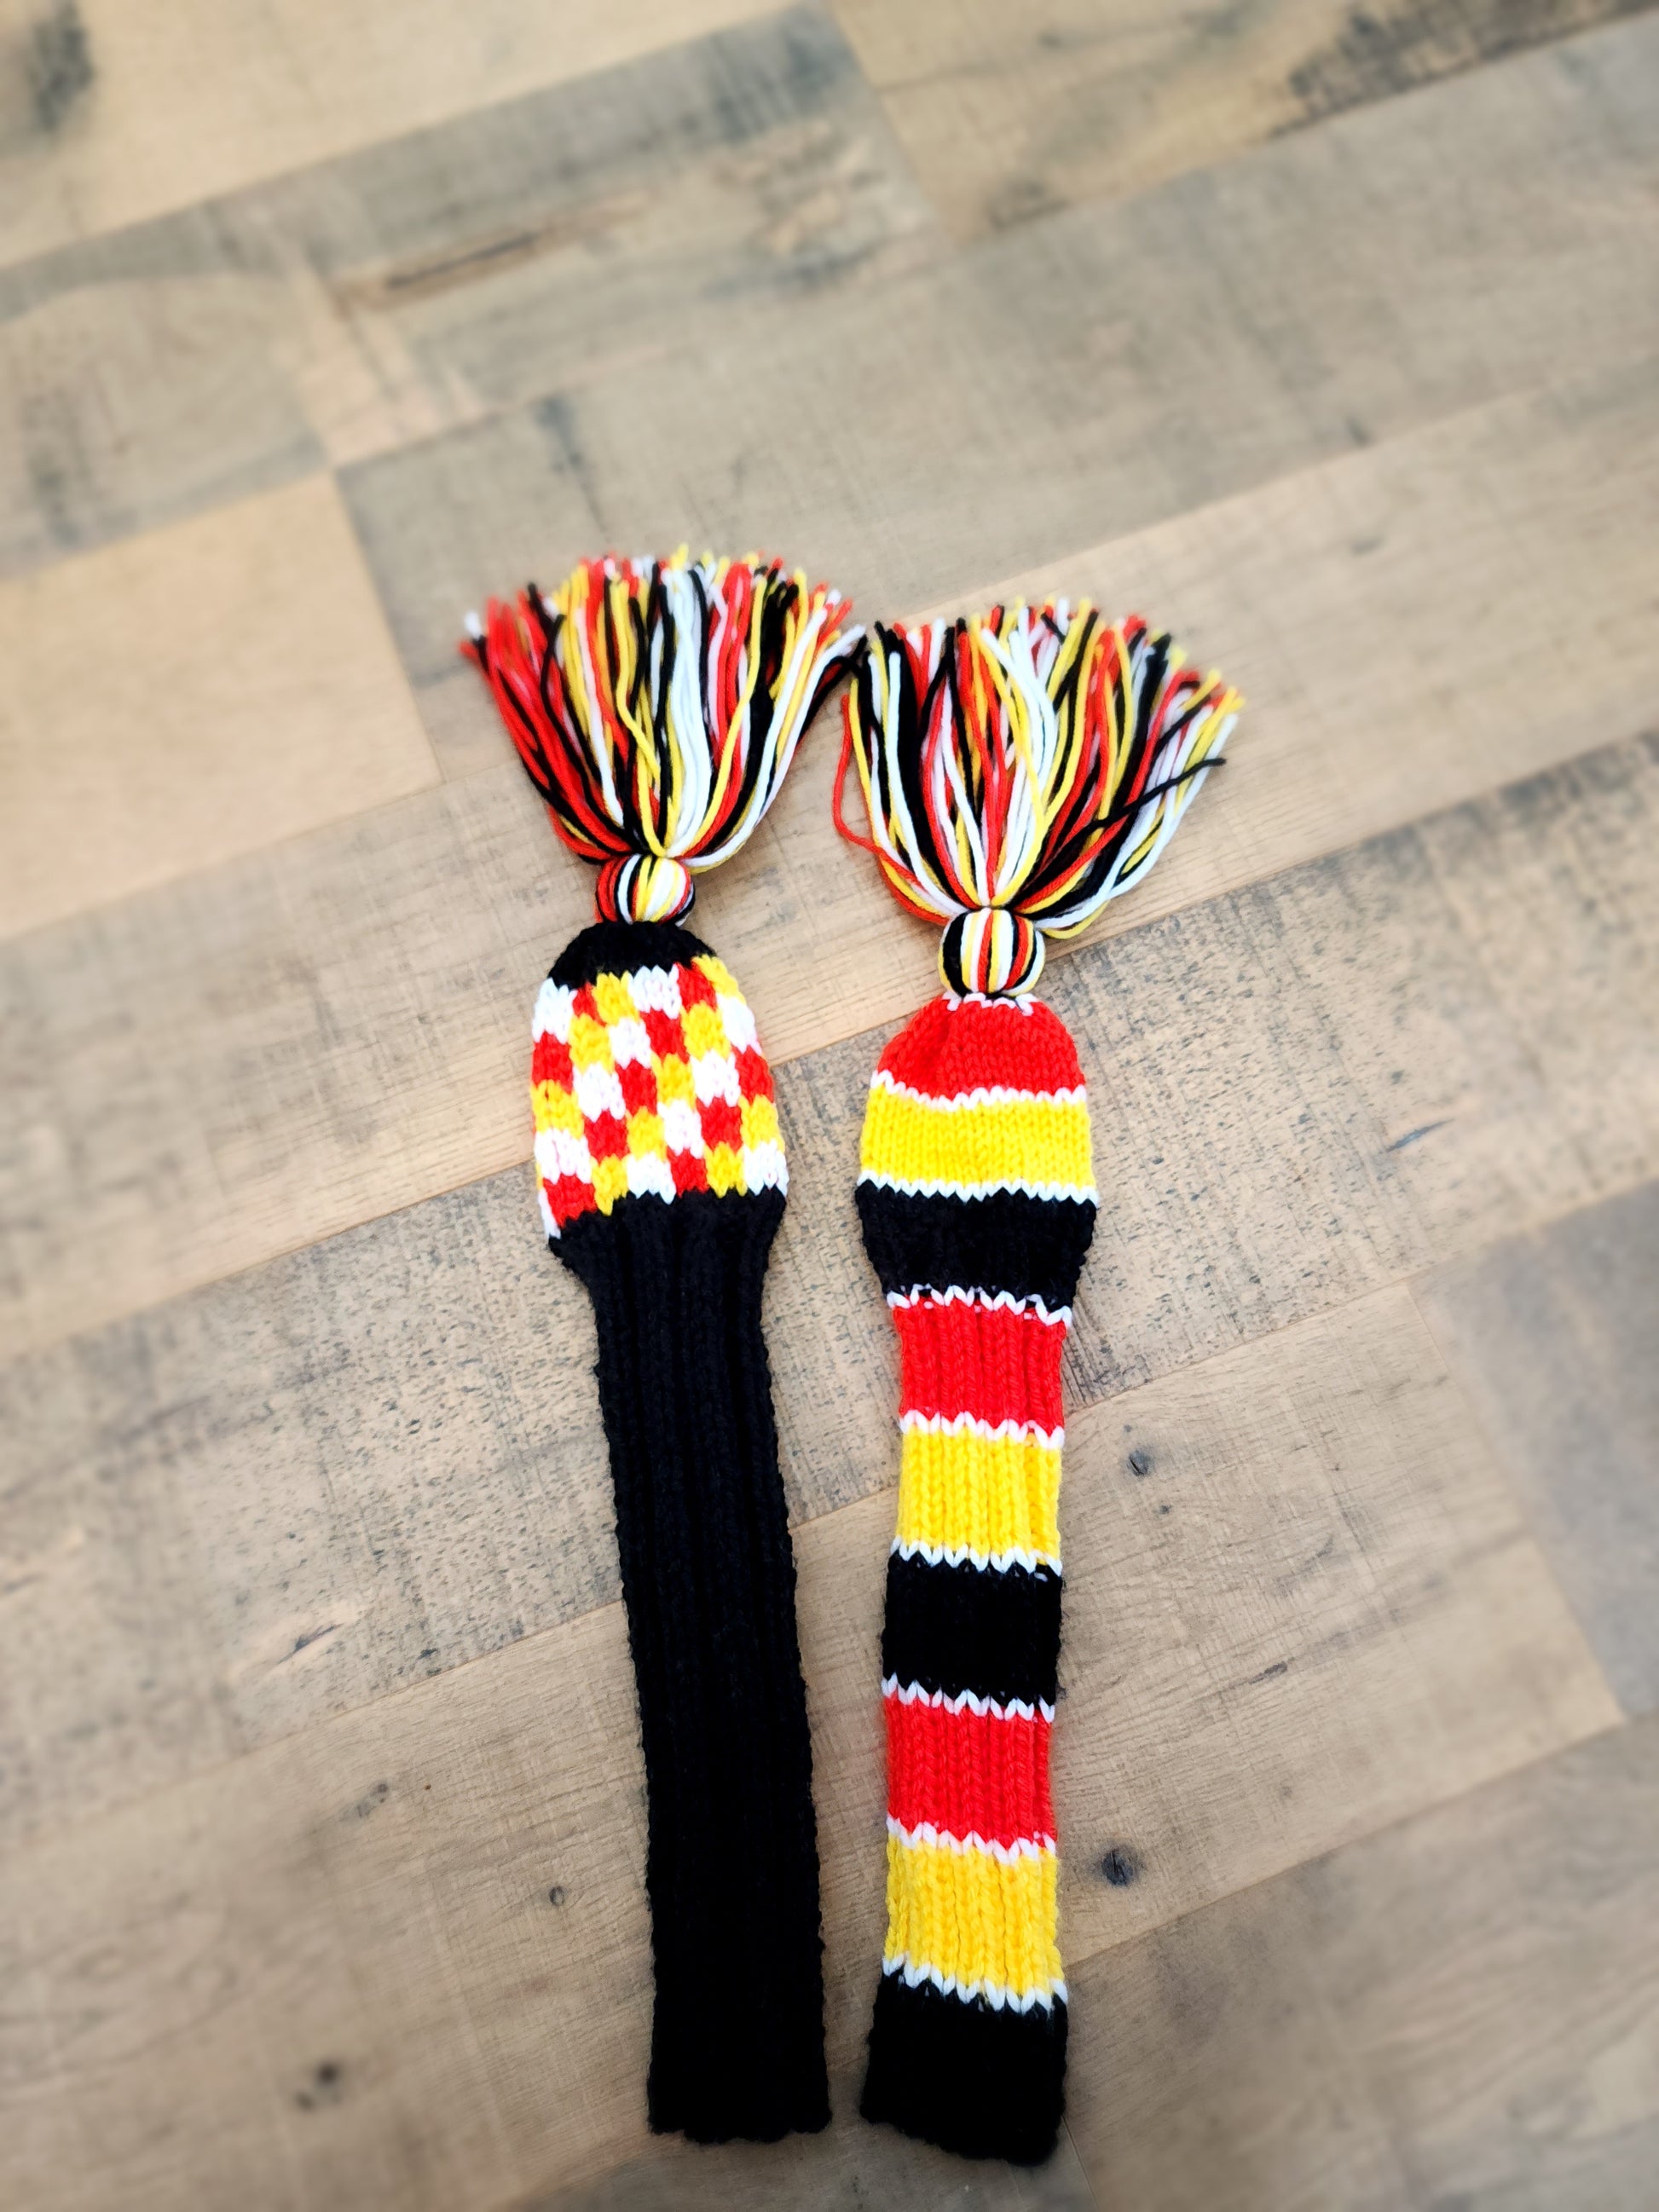 Two Hand Knit Golf Club Head Covers Retro-Vintage Black, Orange, Yellow & White with Tassels for Fairway Woods - Austinknittylimits